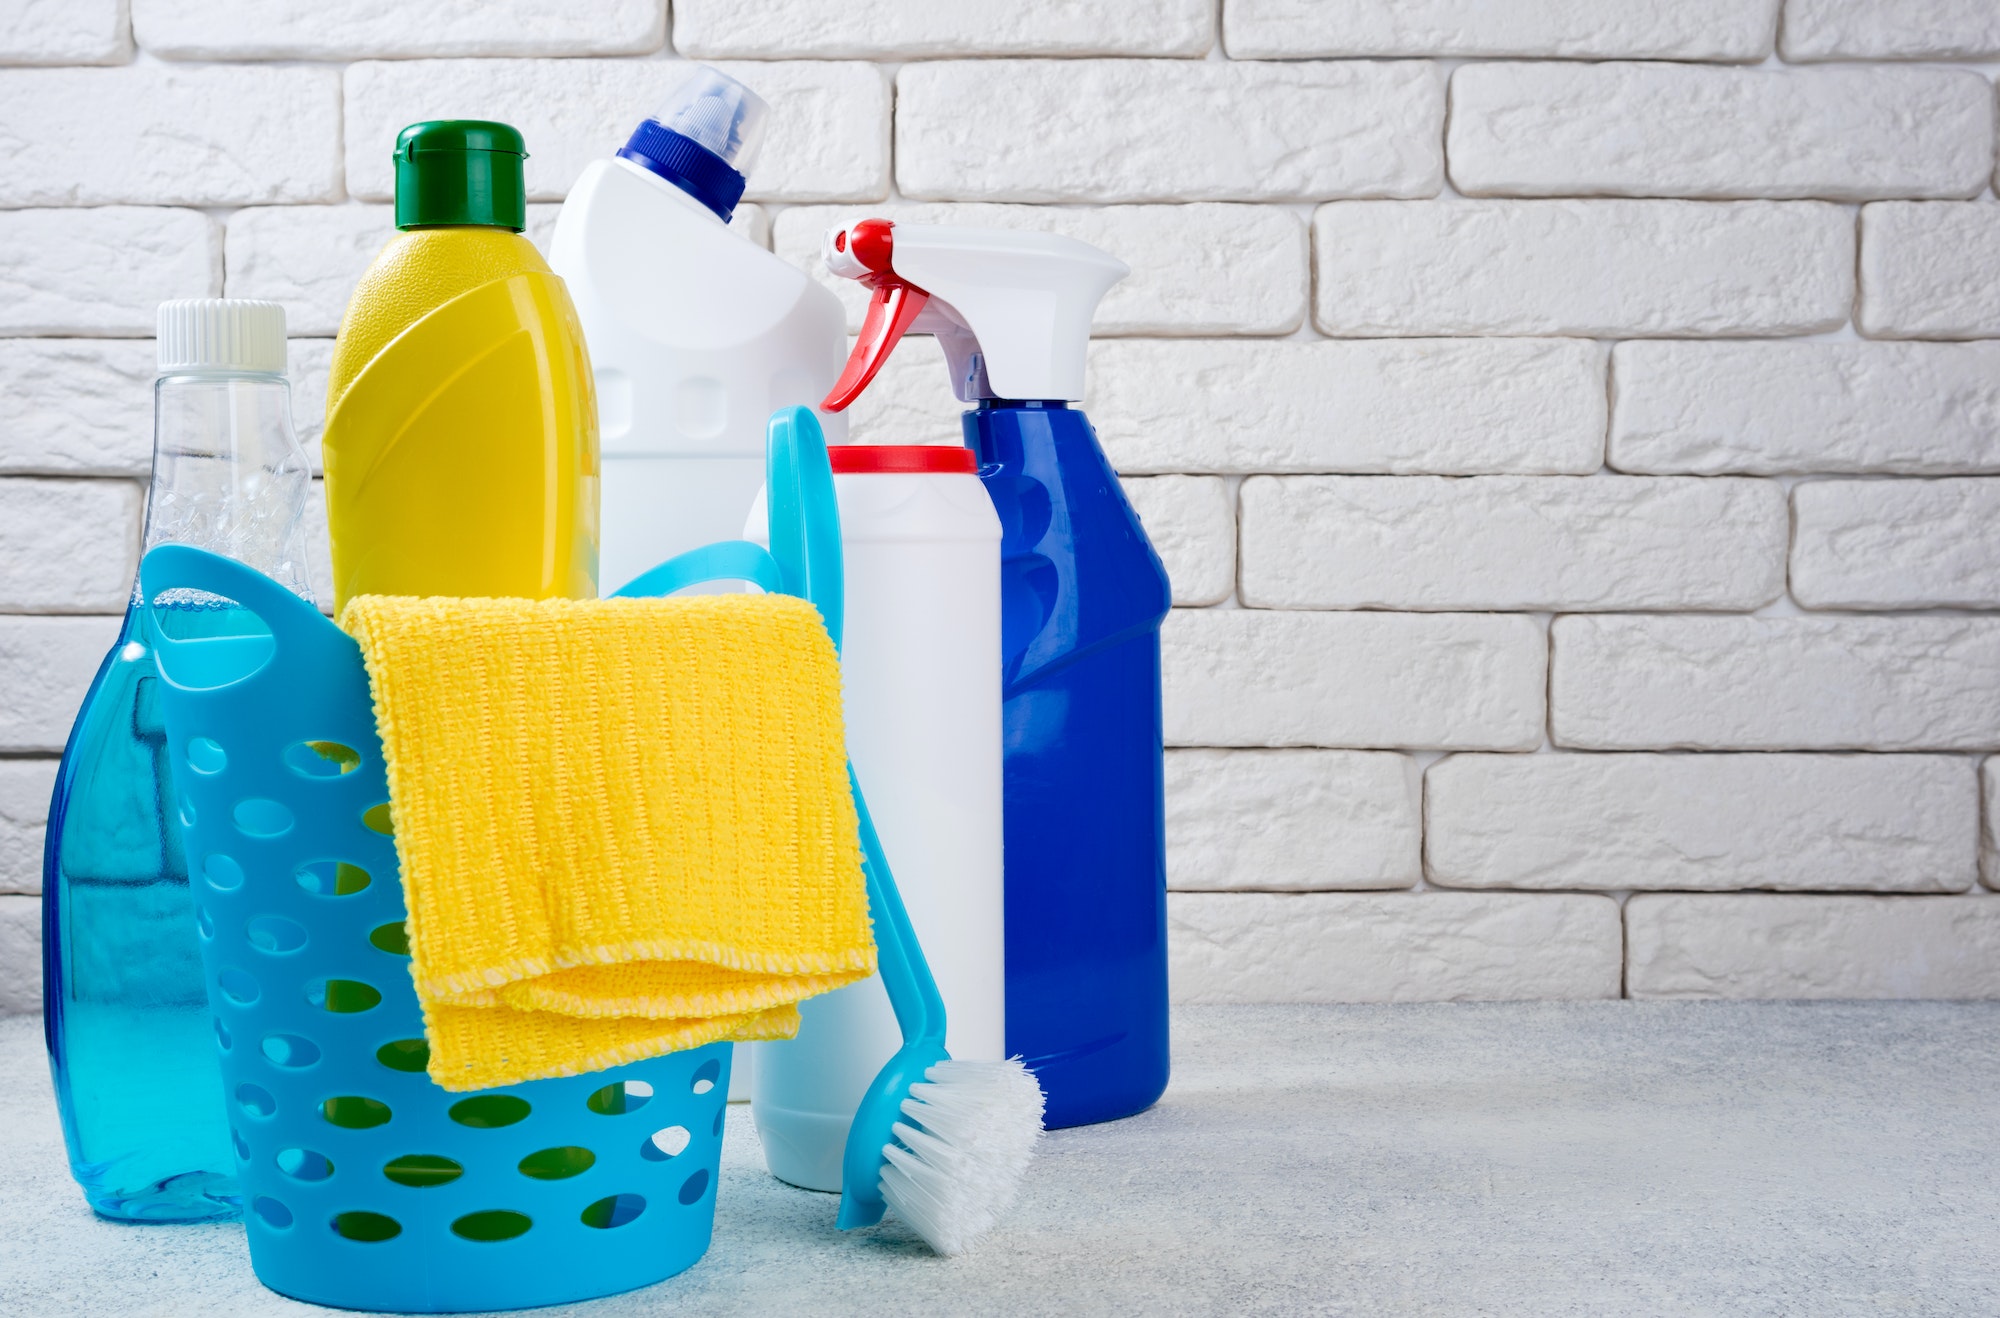 Cleaning background. Basket with cleaning products. Cleaning with supplies, service and clean house